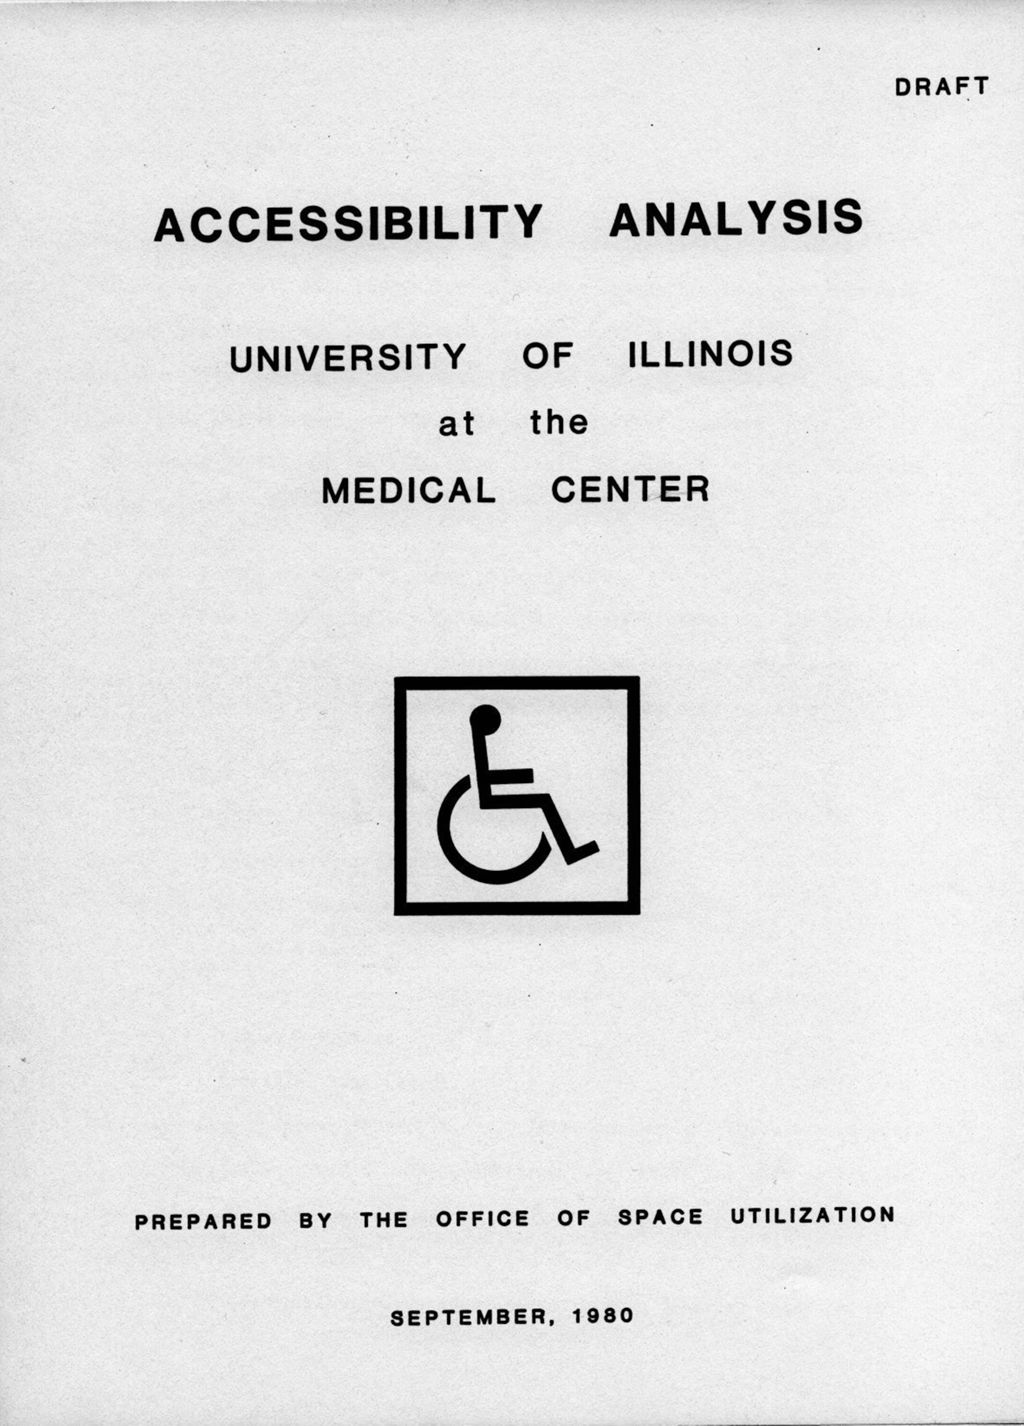 Accessibility Analysis, University of Illinois at the Medical Center